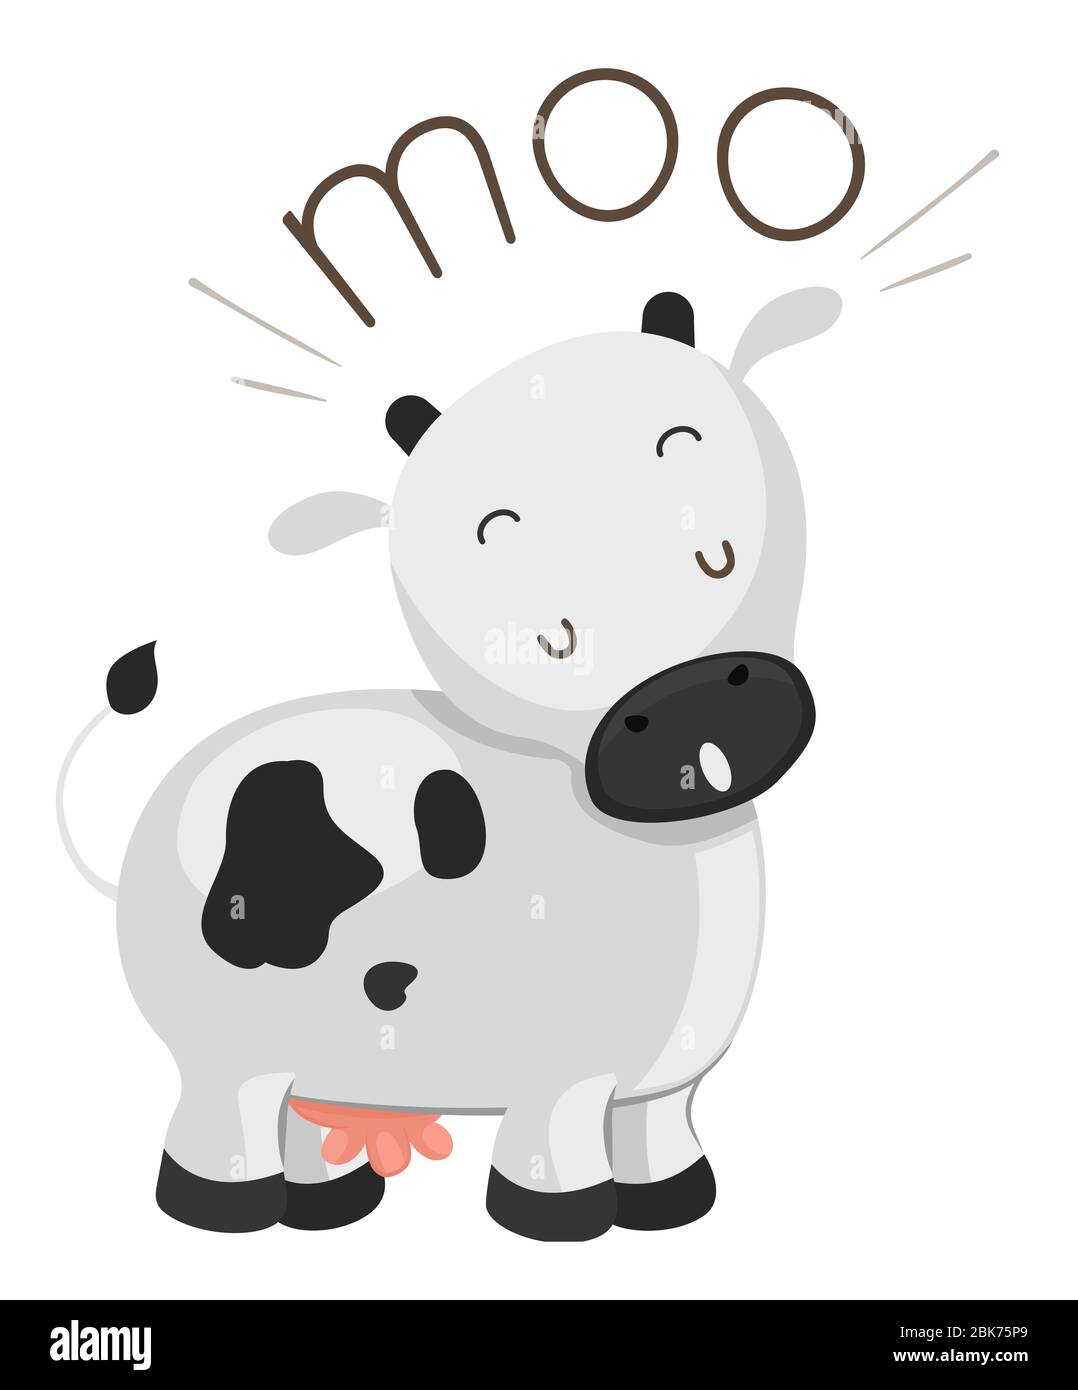 Illustration of a Cow Making a Moo Sound Stock Photo - Alamy